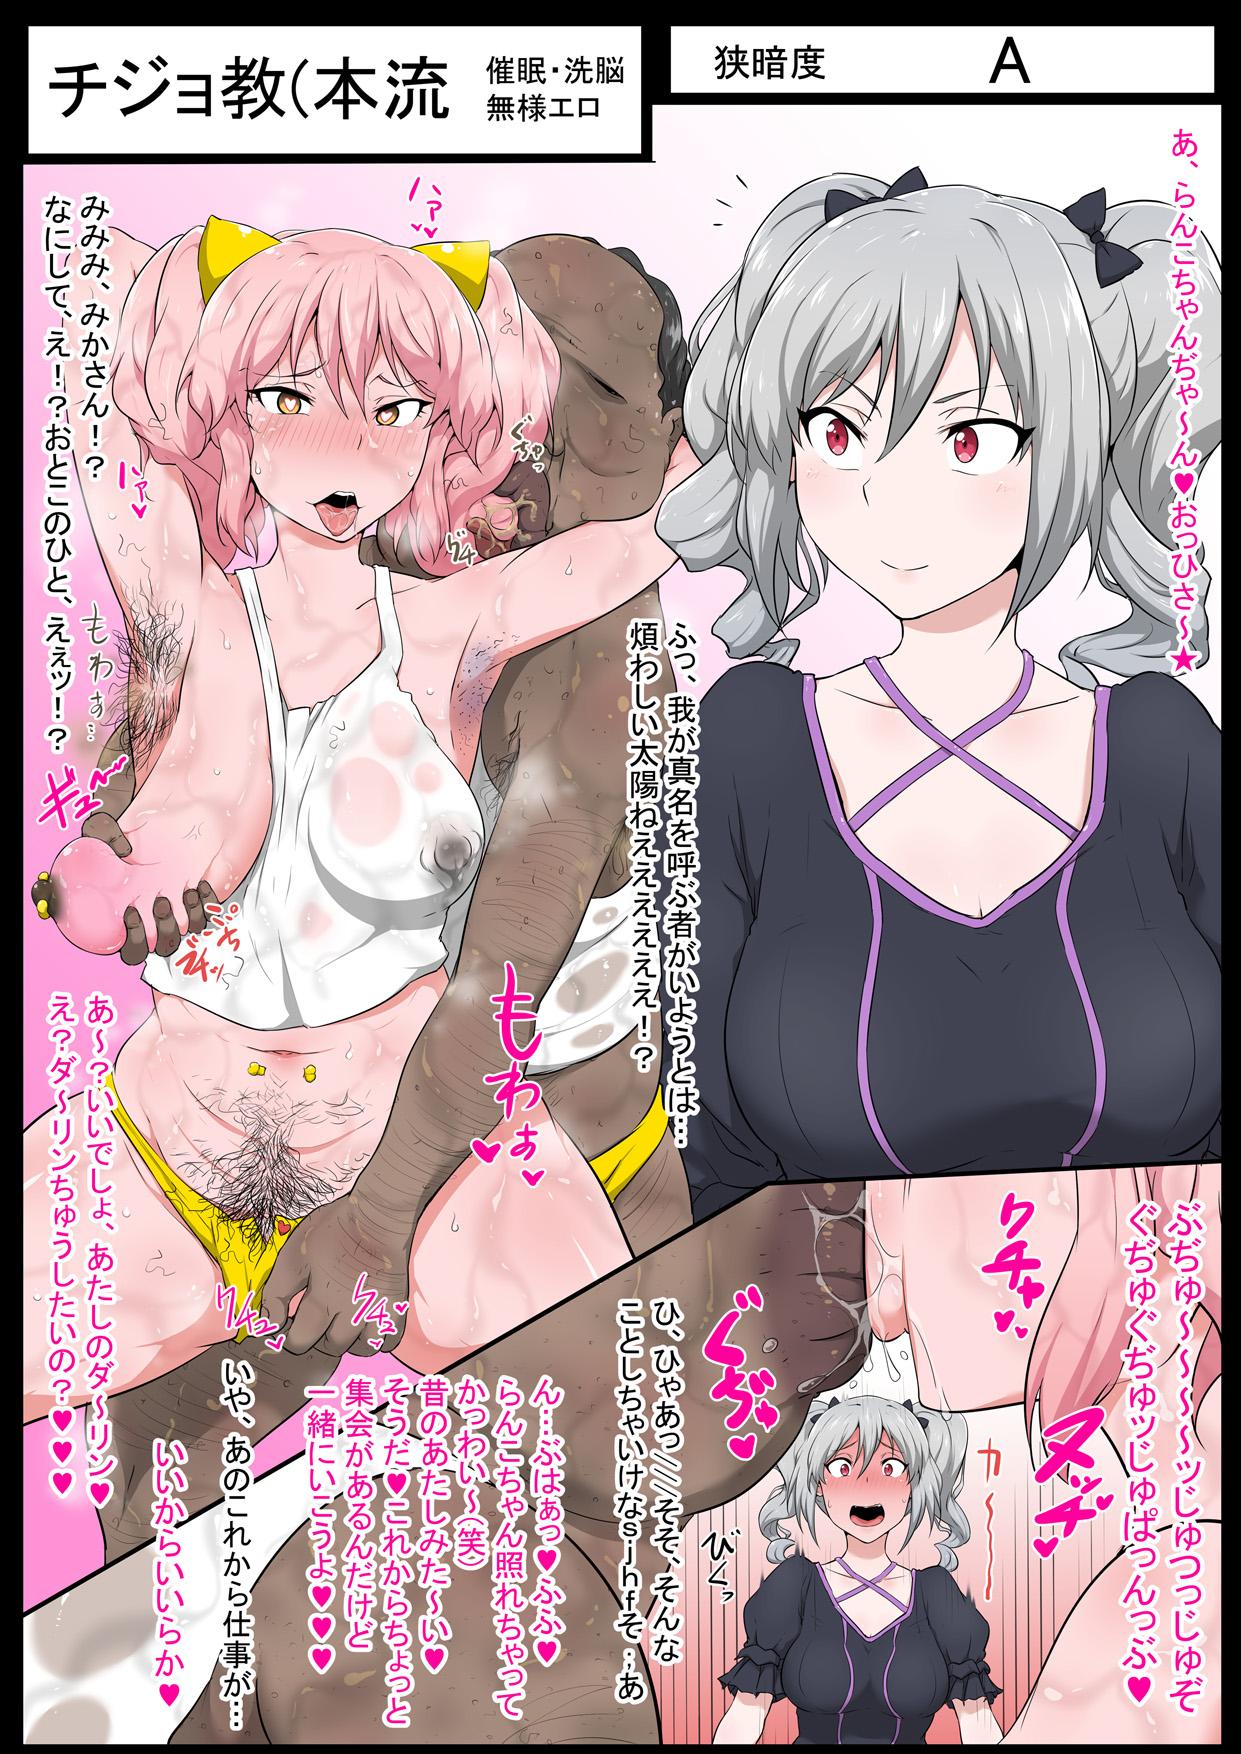 Long Book about Narrow and Dark Sexual Inclinations Vol.2 Hypnosis / Brainwash - The idolmaster Slave - Page 11